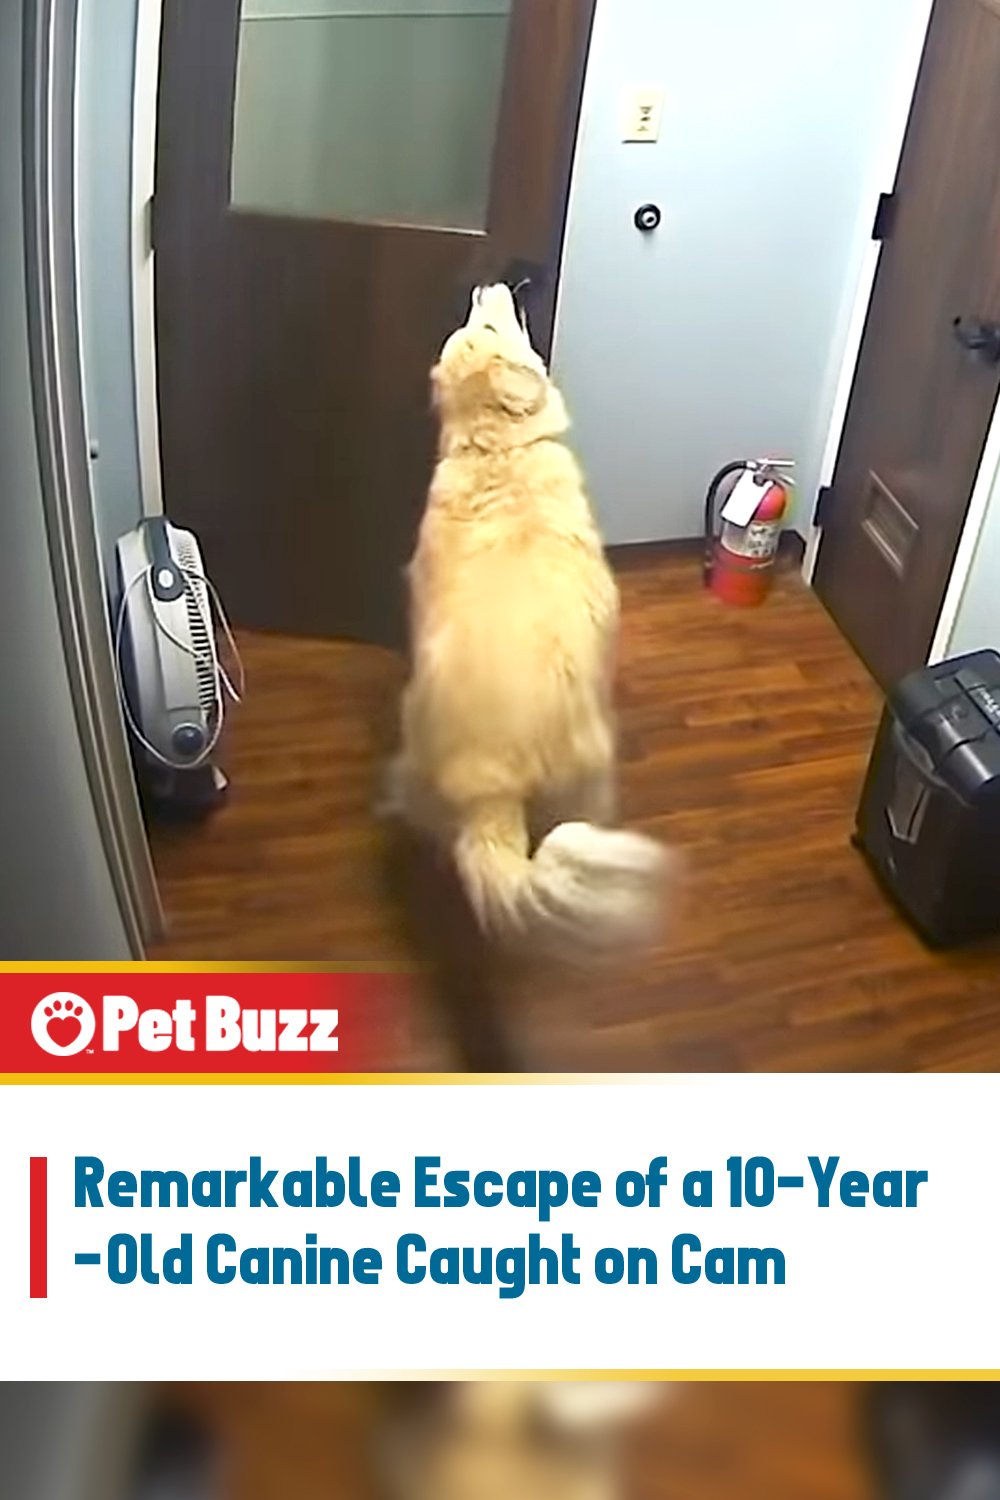 Remarkable Escape of a 10-Year-Old Canine Caught on Cam